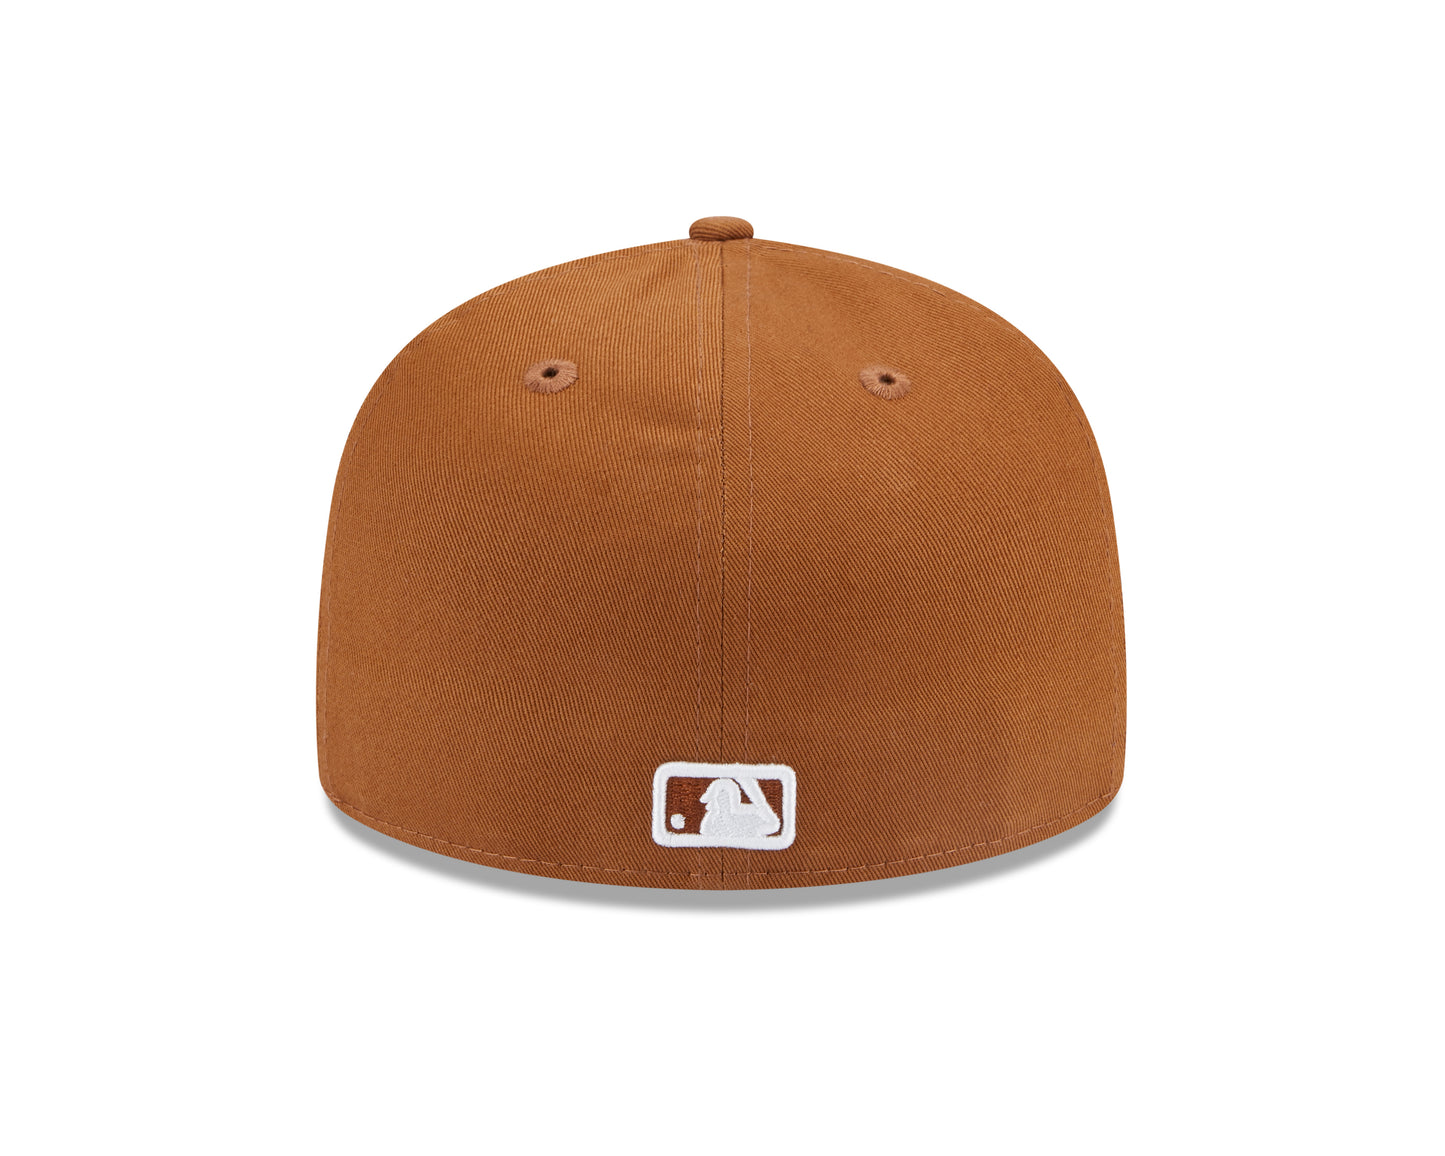 New Era - 59Fifty Fitted Cap TEAM OUTLINE Los Angeles Dodgers - Light Brown - Headz Up 